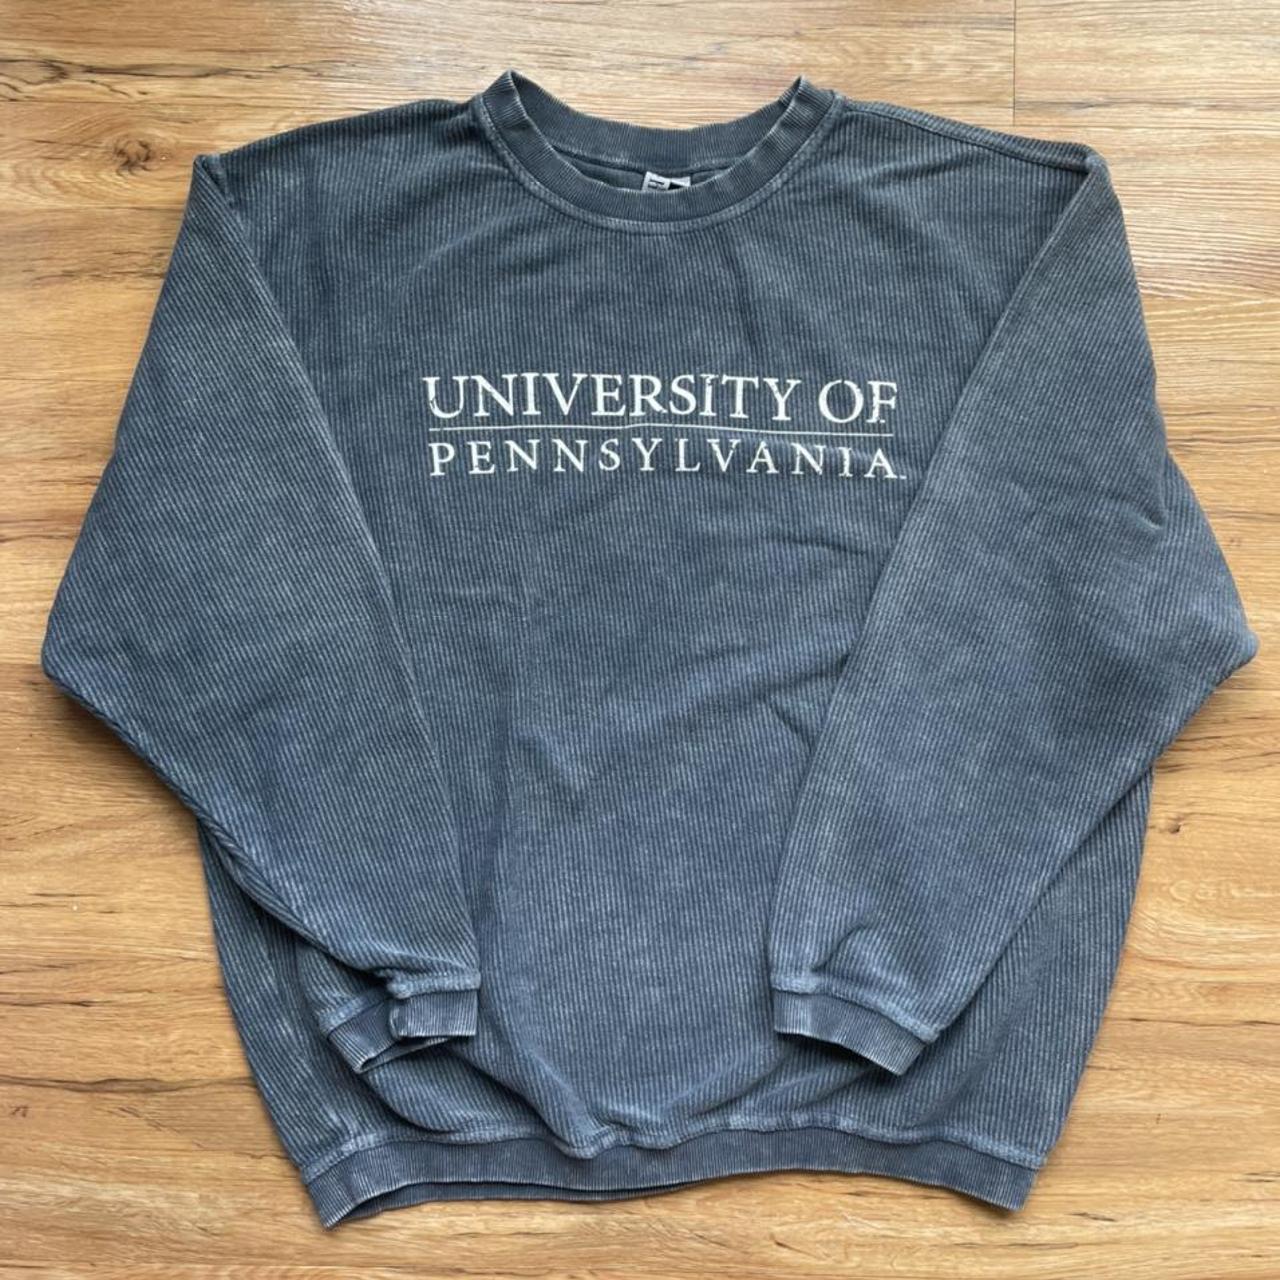 Product Image 1 - UPenn College sweatershirt
☑️ authentic ~